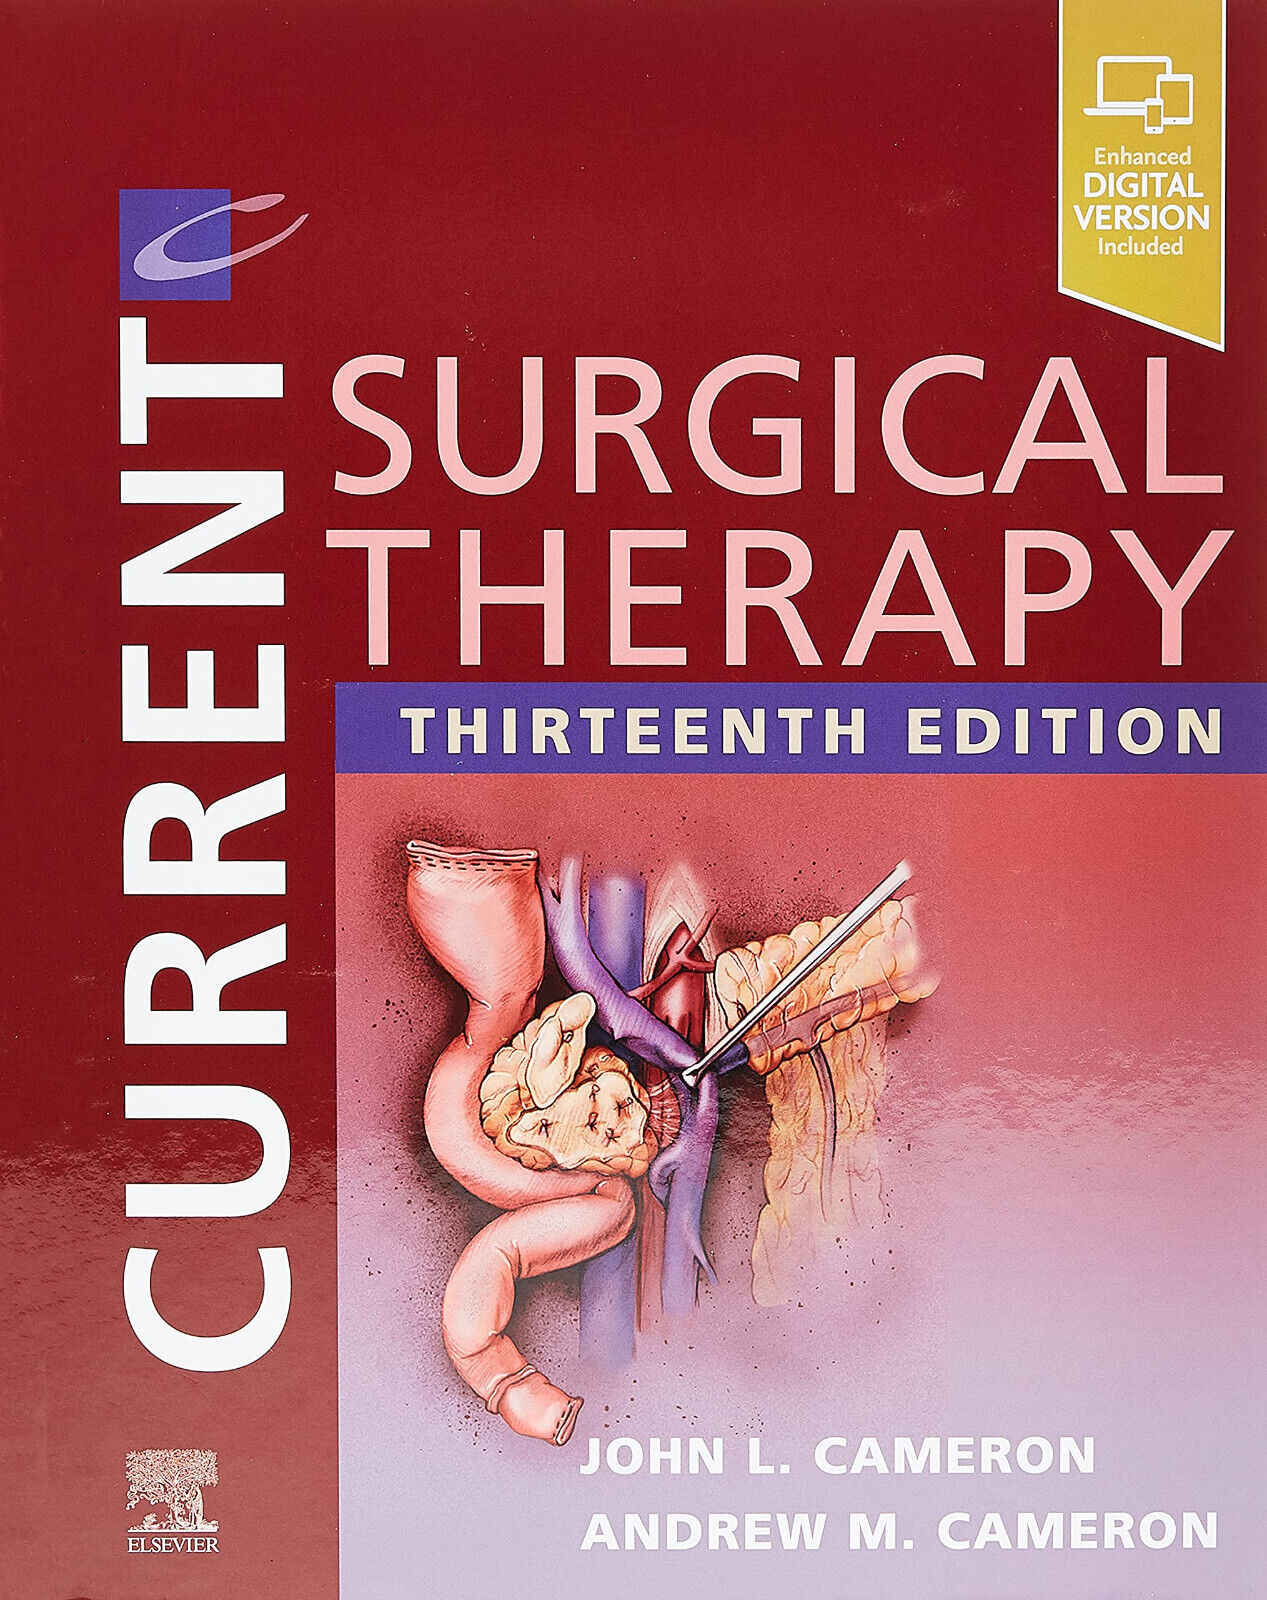 Current Surgical Therapy - John L. Cameron, Andrew M. Cameron - 2019